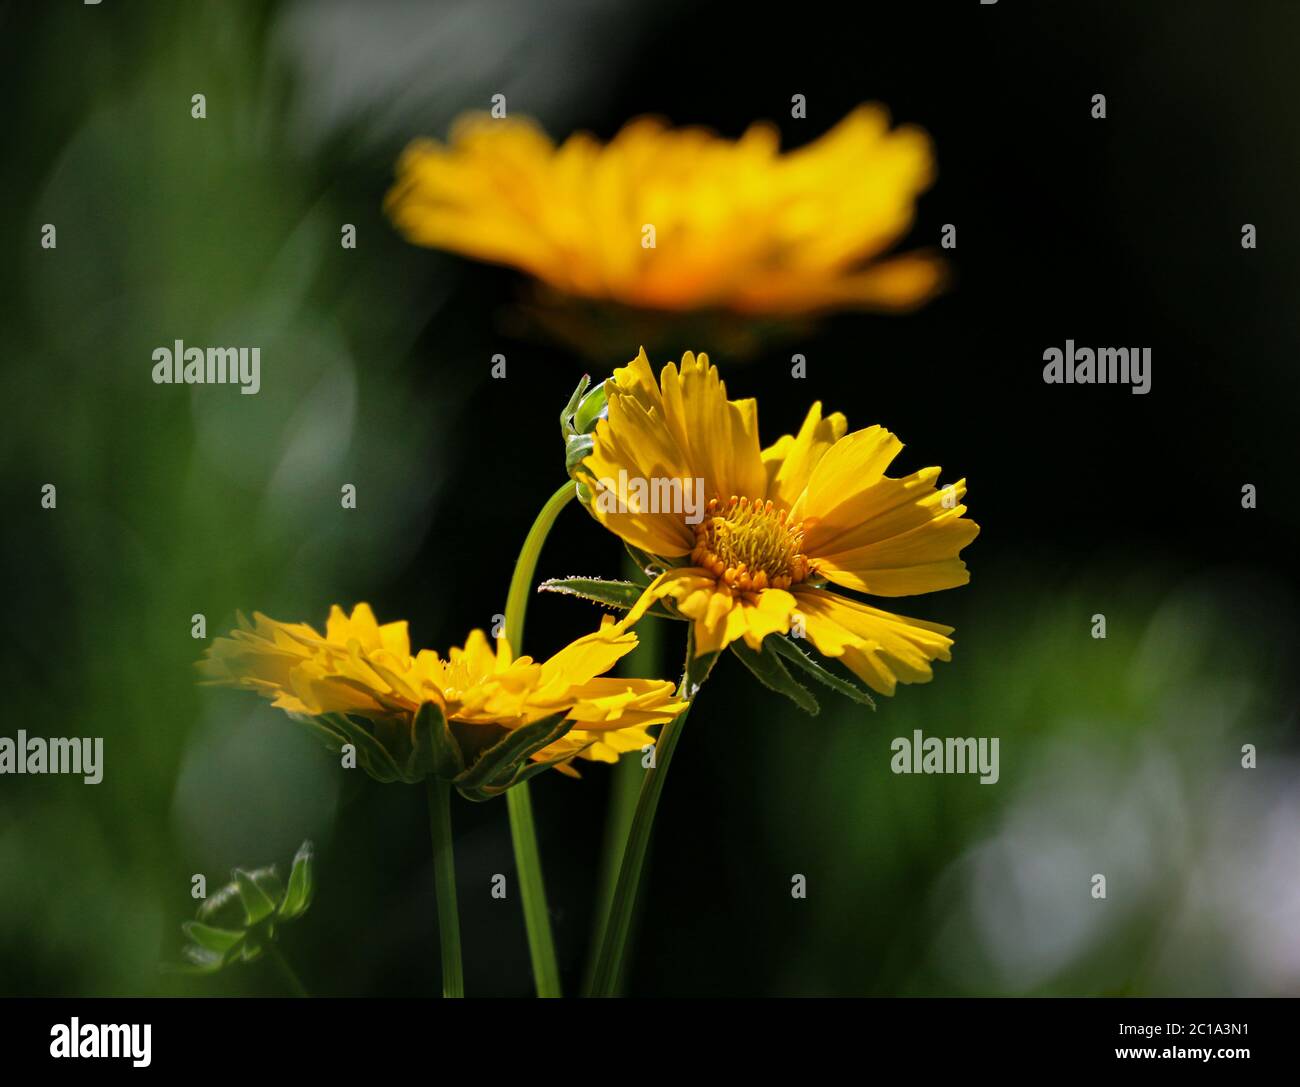 Yellow Heliopsis flowerhead in gentle green blurred foreground Stock Photo